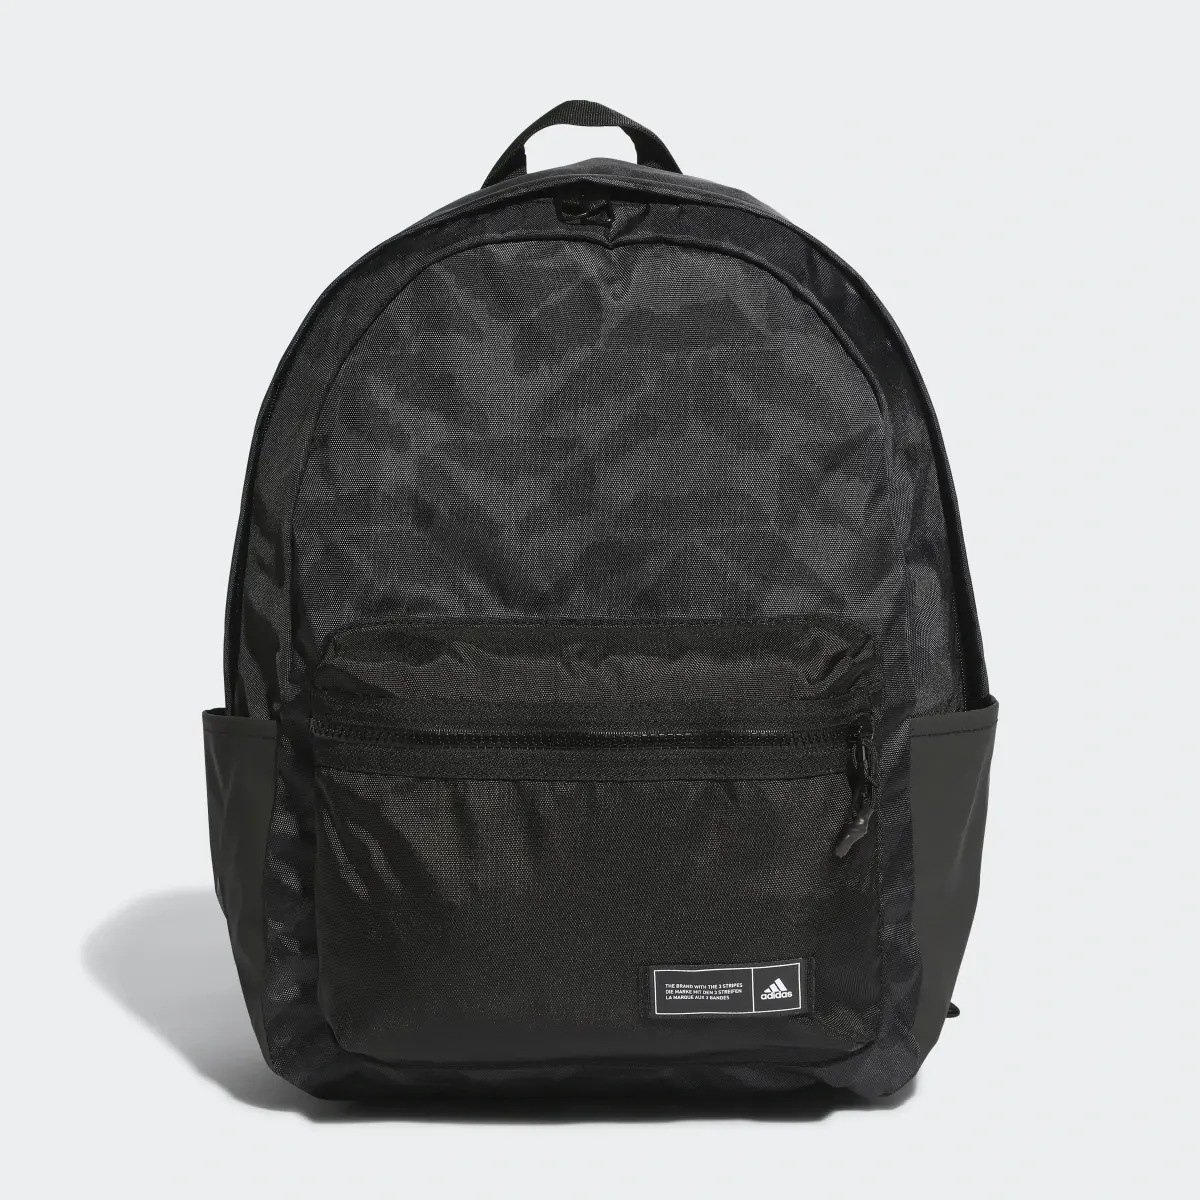 Adidas Back to School Badge of Sport Backpack. 2